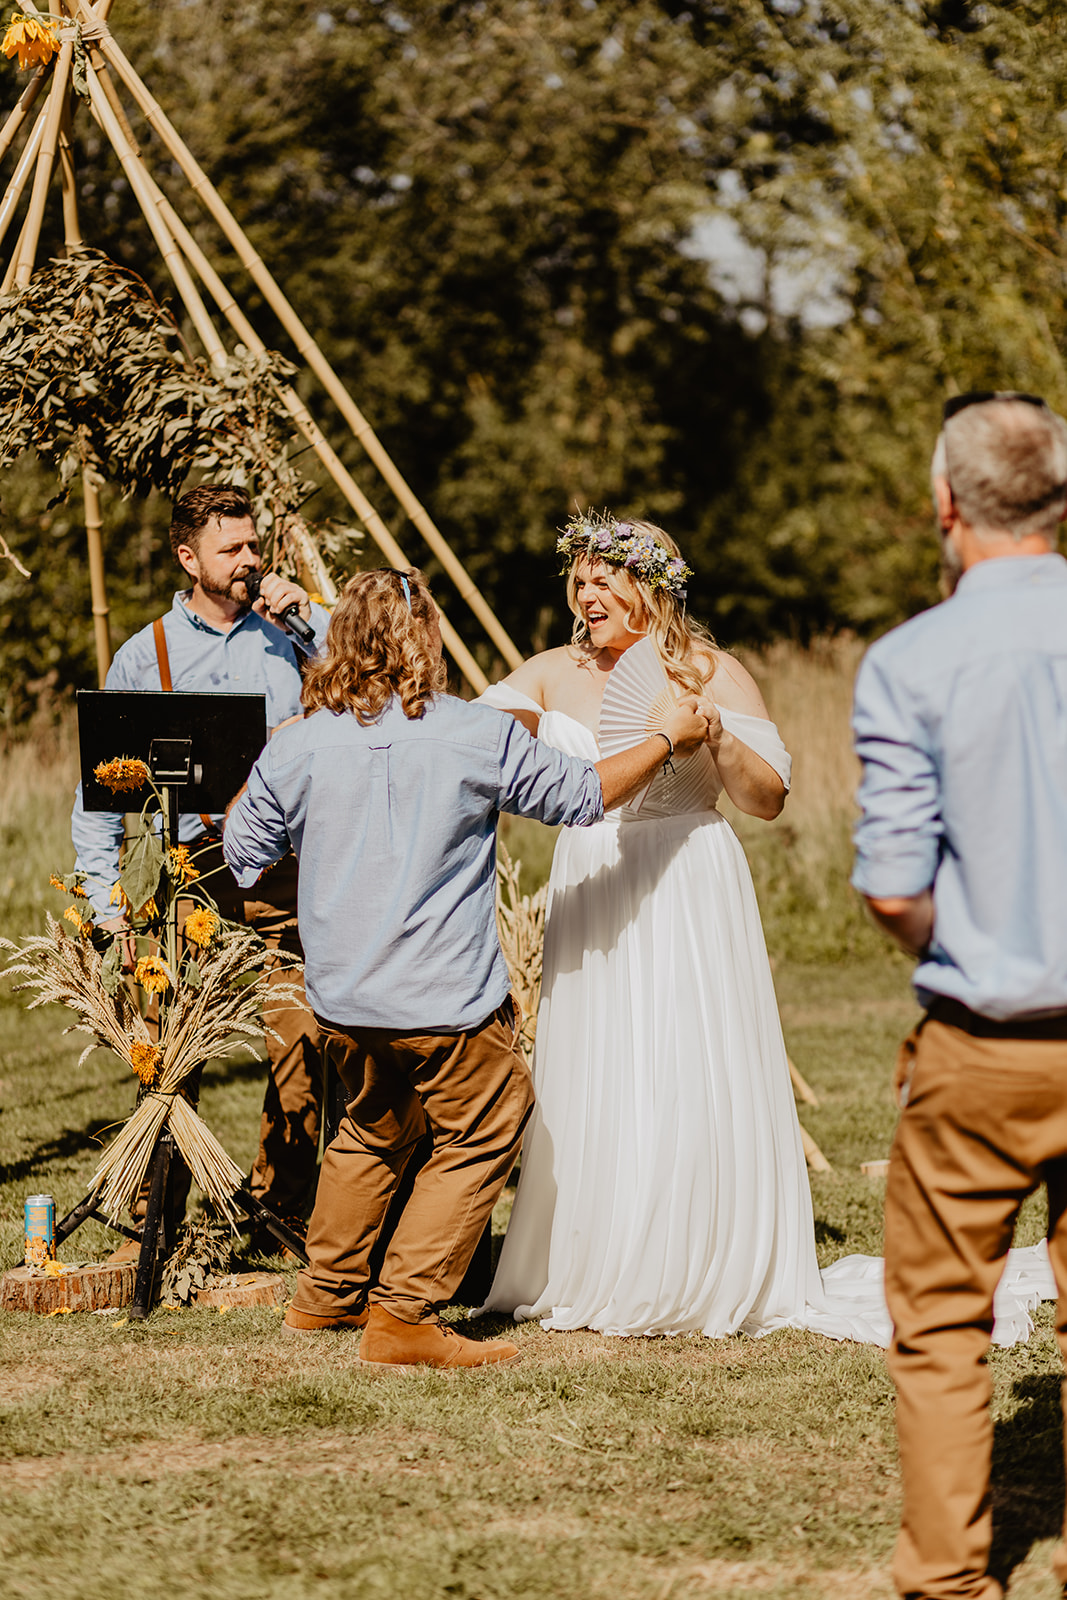 Bride and Groom exchanging vows at a wedding at Mac's Farm in Sussex. By OliveJoy Photography.